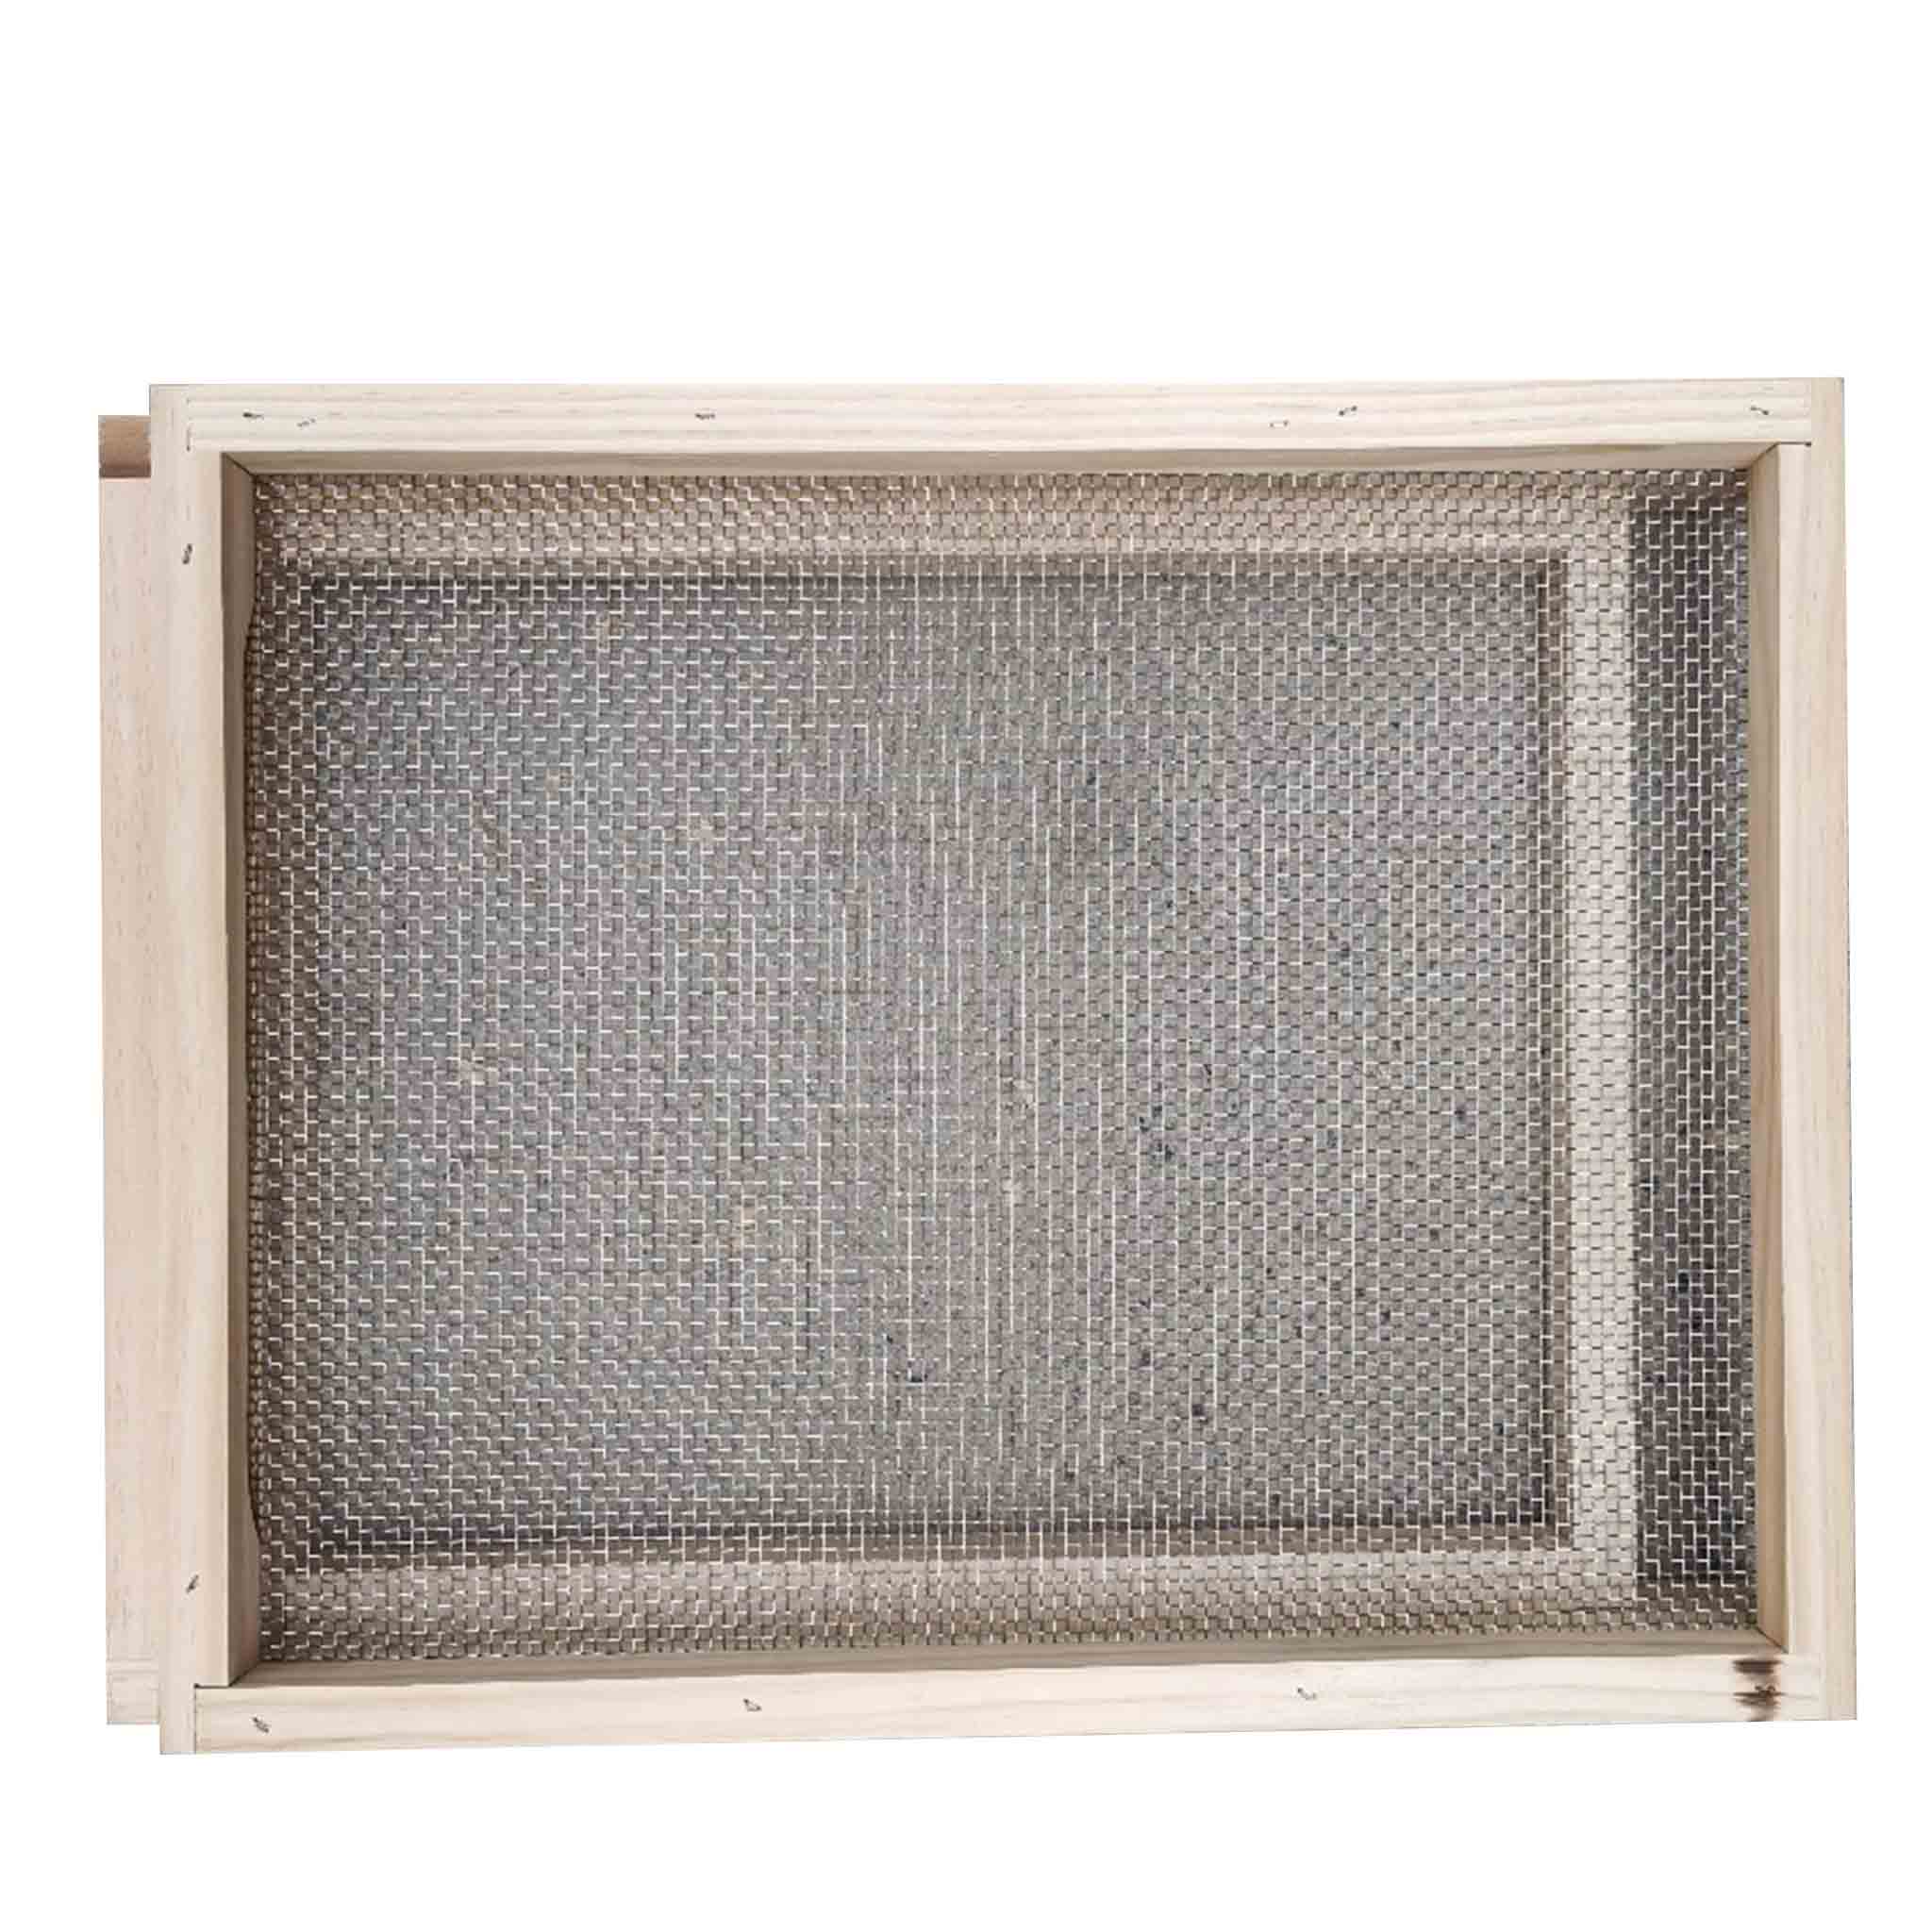 Screened Ventilation Bottom Board/Screened Floorboard - Hive Parts collection by Buzzbee Beekeeping Supplies